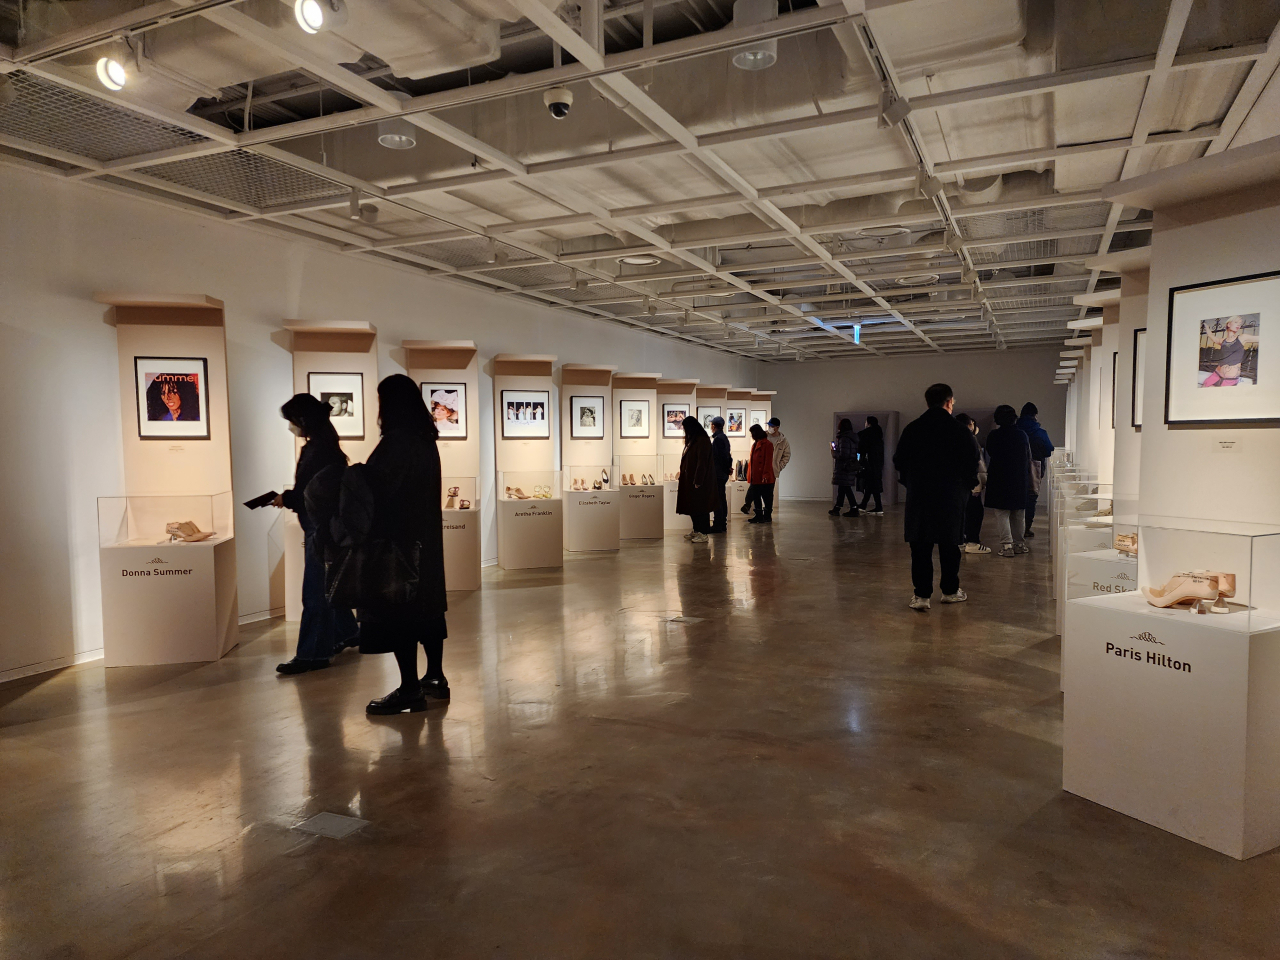 People visit the exhibition “Shoes & Bags” on Dec. 31. (Hwang Dong-hee/The Korea Herald)